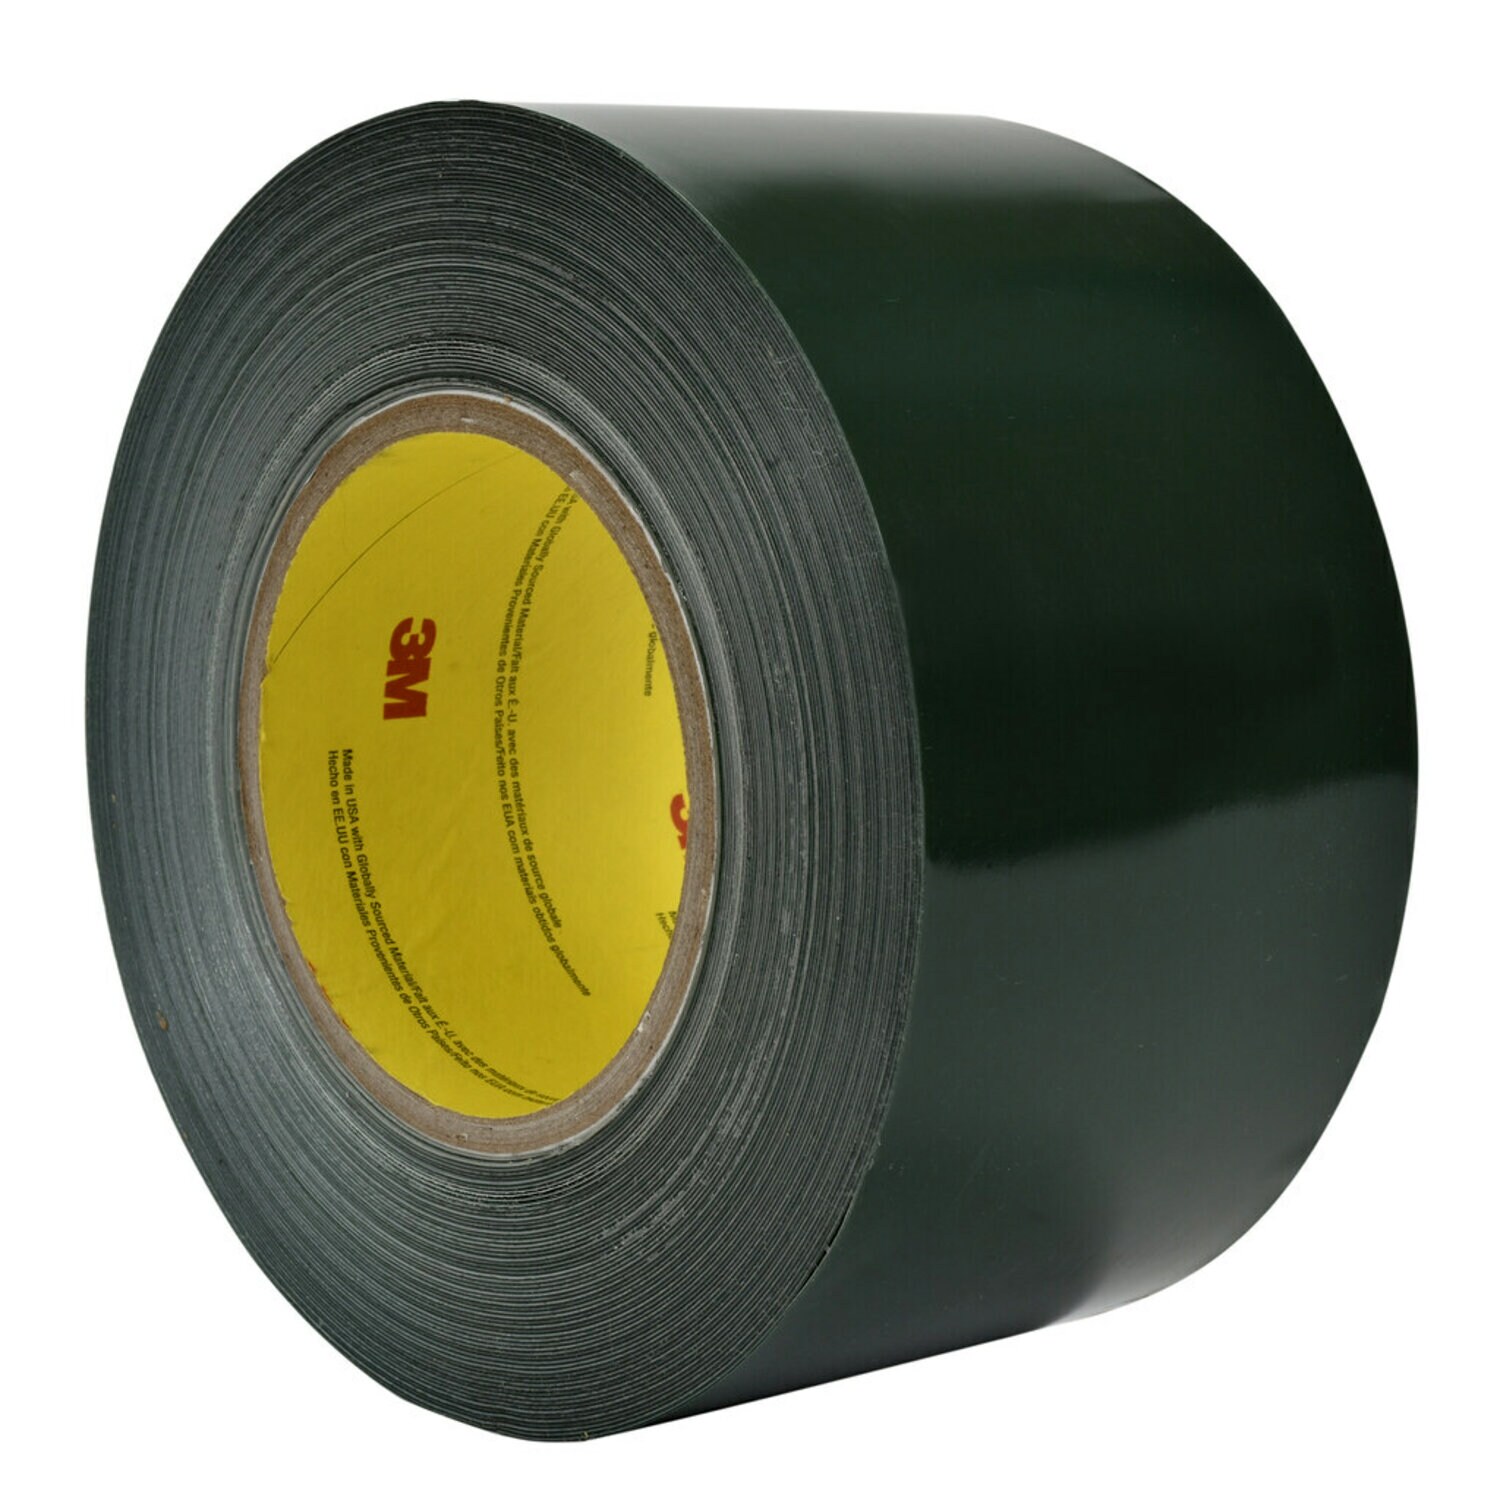 7010376443 - 3M Sealing and Holding Tape 8069, 3 in x 25 yd, 12 rolls per case,
Solid Liner